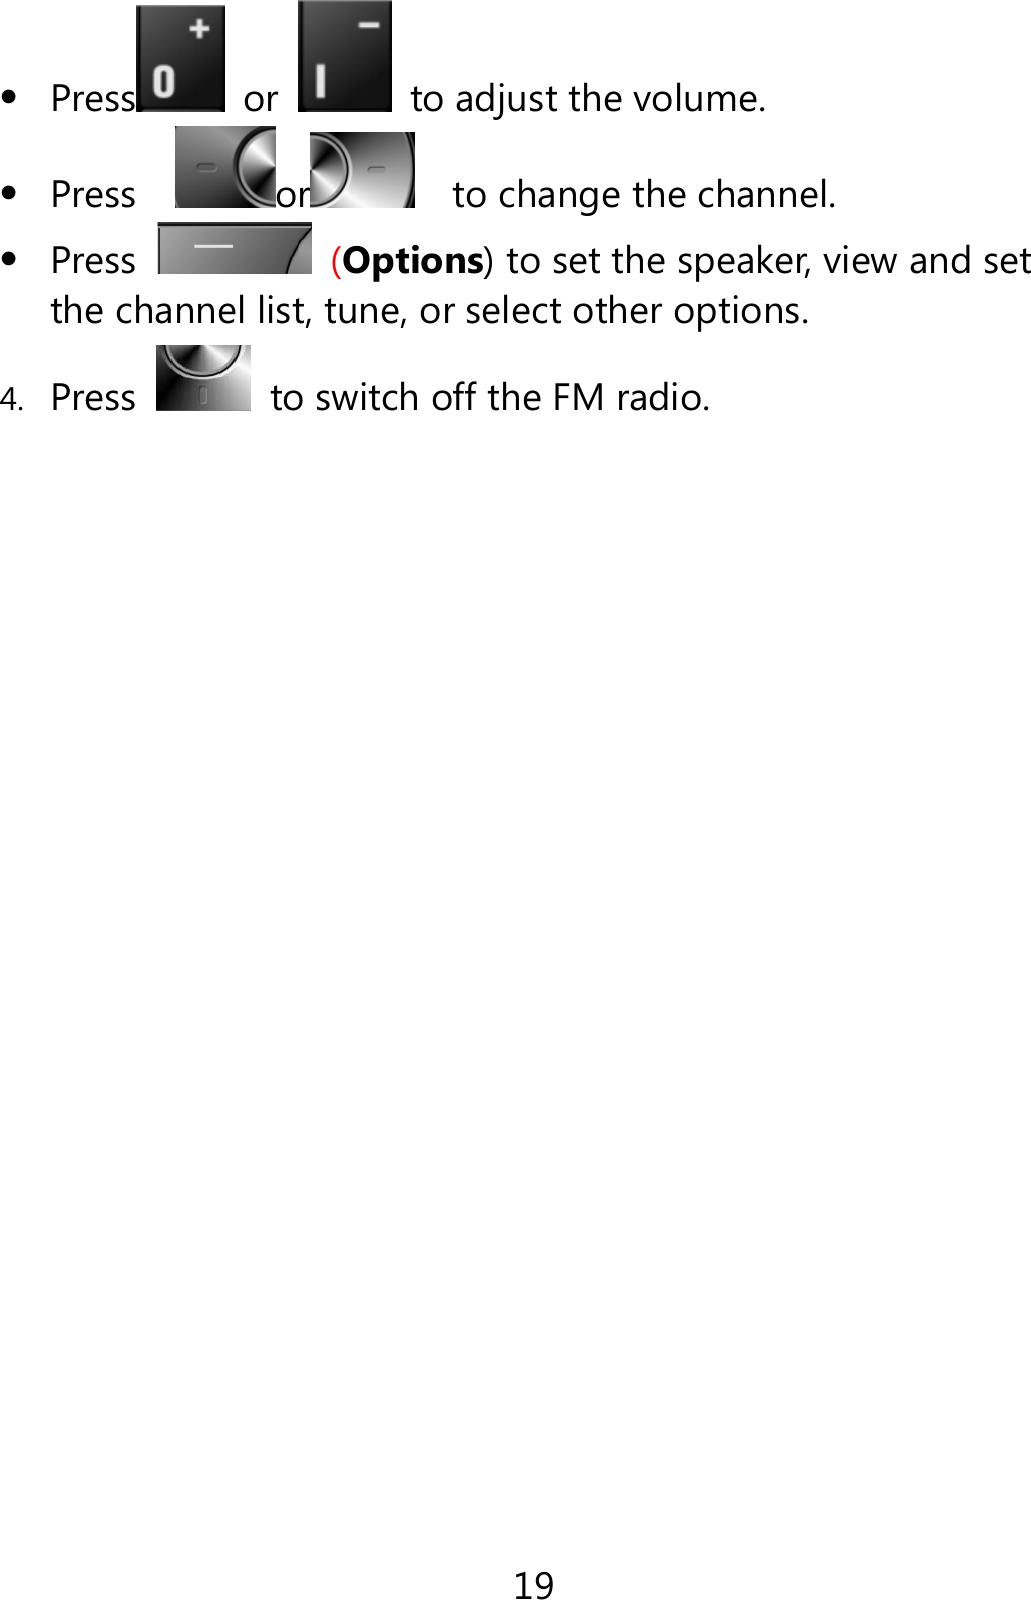 19  Press  or    to adjust the volume.  Press   or     to change the channel.  Press   (Options) to set the speaker, view and set the channel list, tune, or select other options. 4. Press   to switch off the FM radio.  